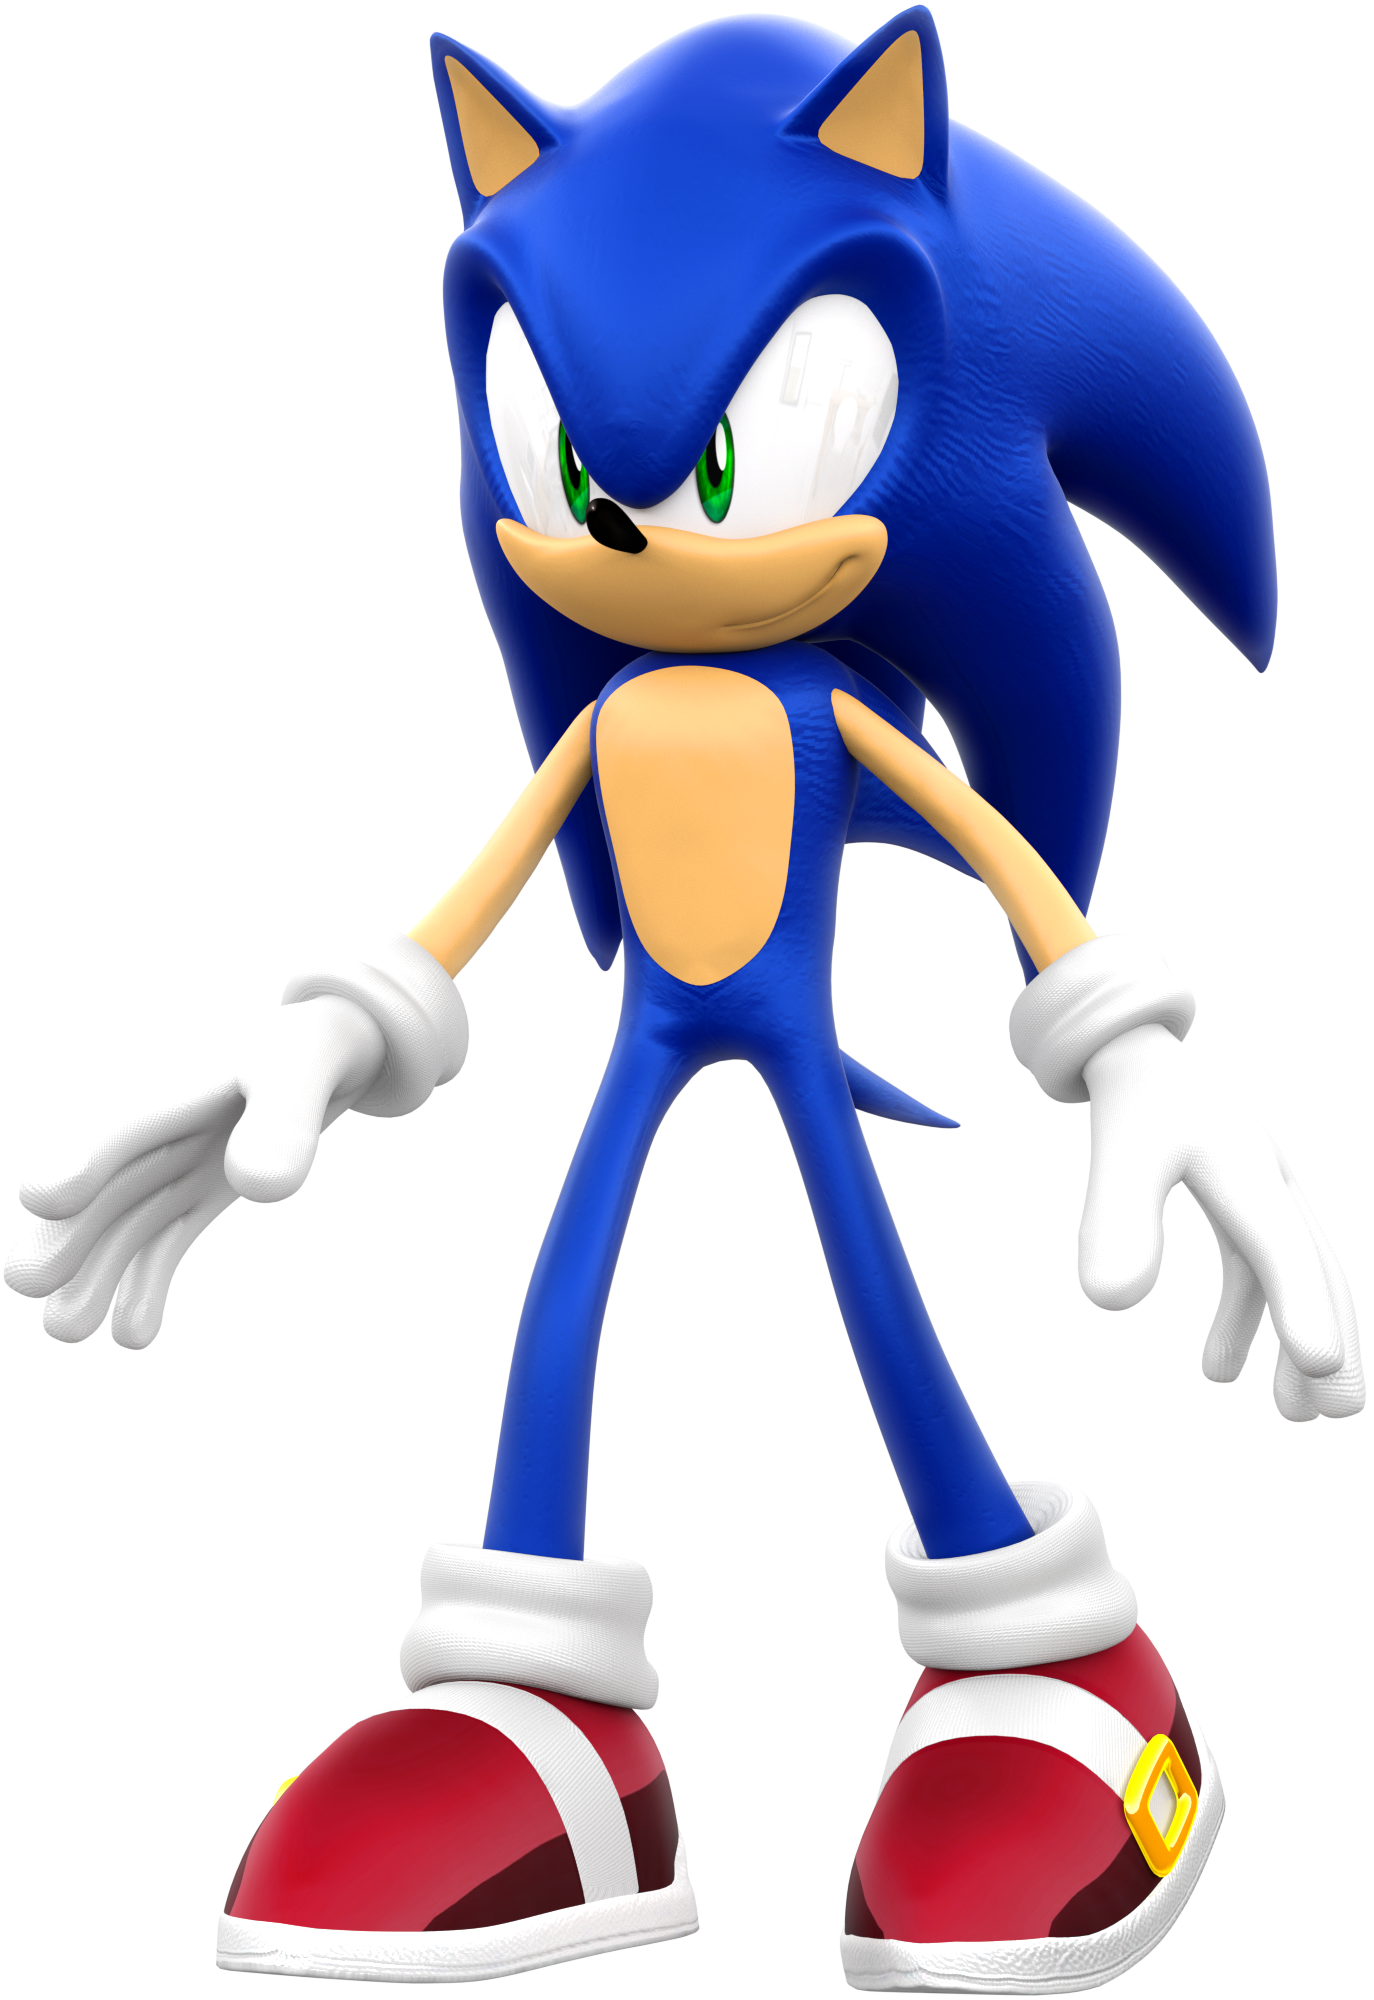 Sonic 2006 - Sonic the Hedgehog Standing by ModernLixes on DeviantArt